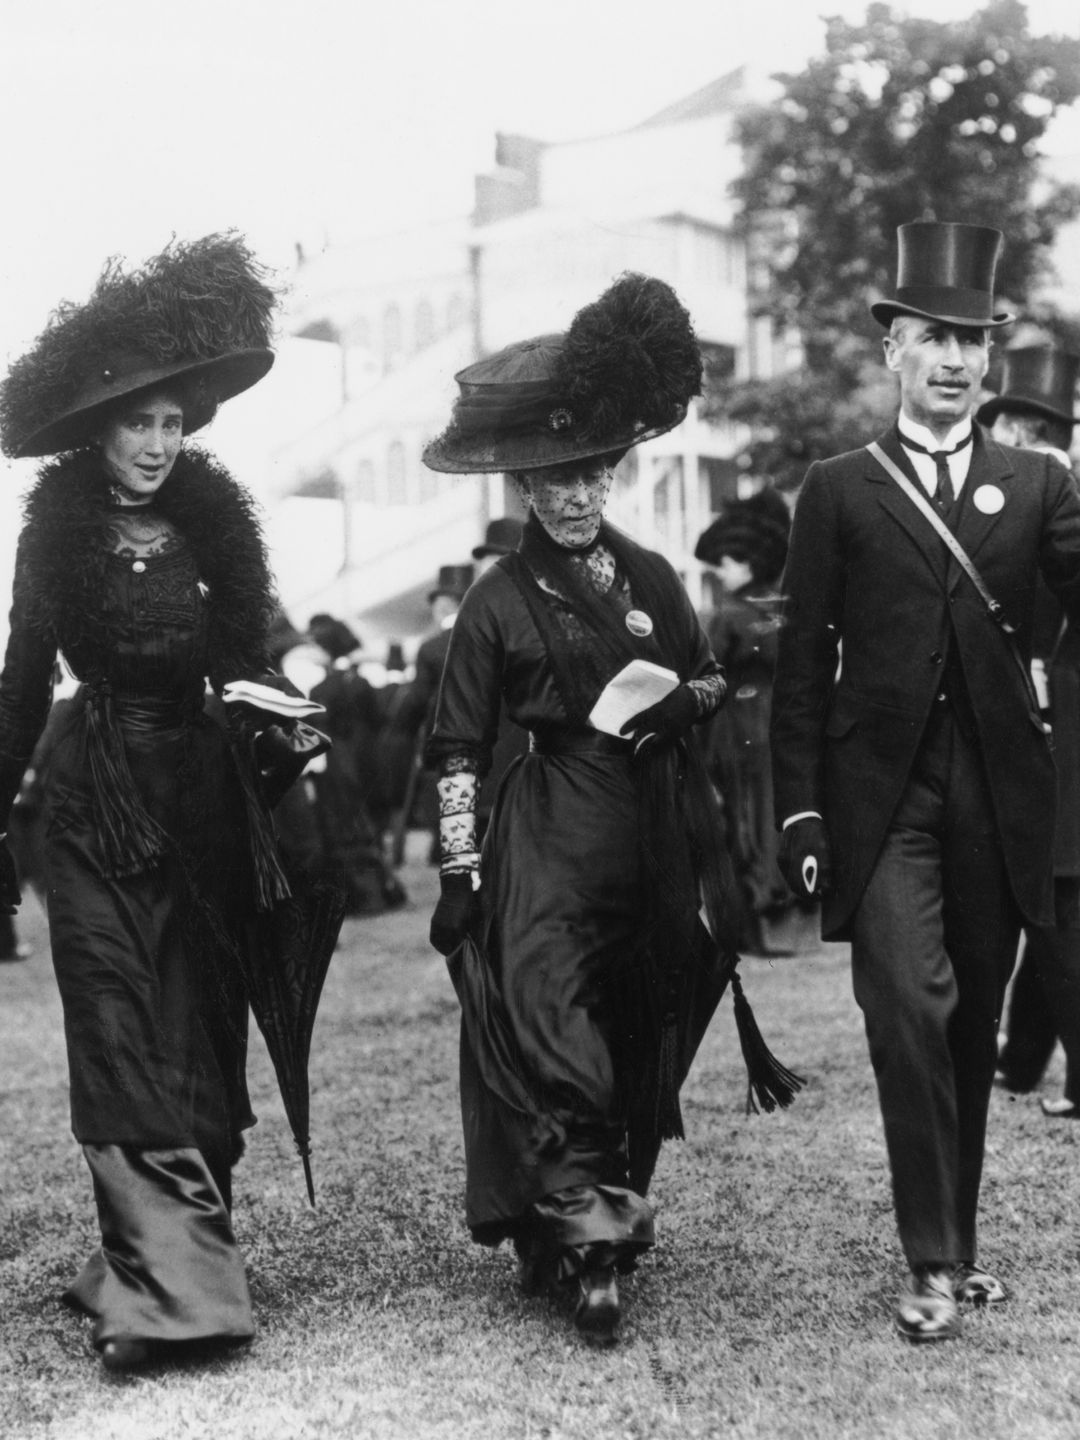 Spectators, including the Marchioness of Camden, at the Royal Ascot race meeting at Ascot Racecourse, Berkshire, June 1910.  (Photo by Topical Press Agency/Getty Images)